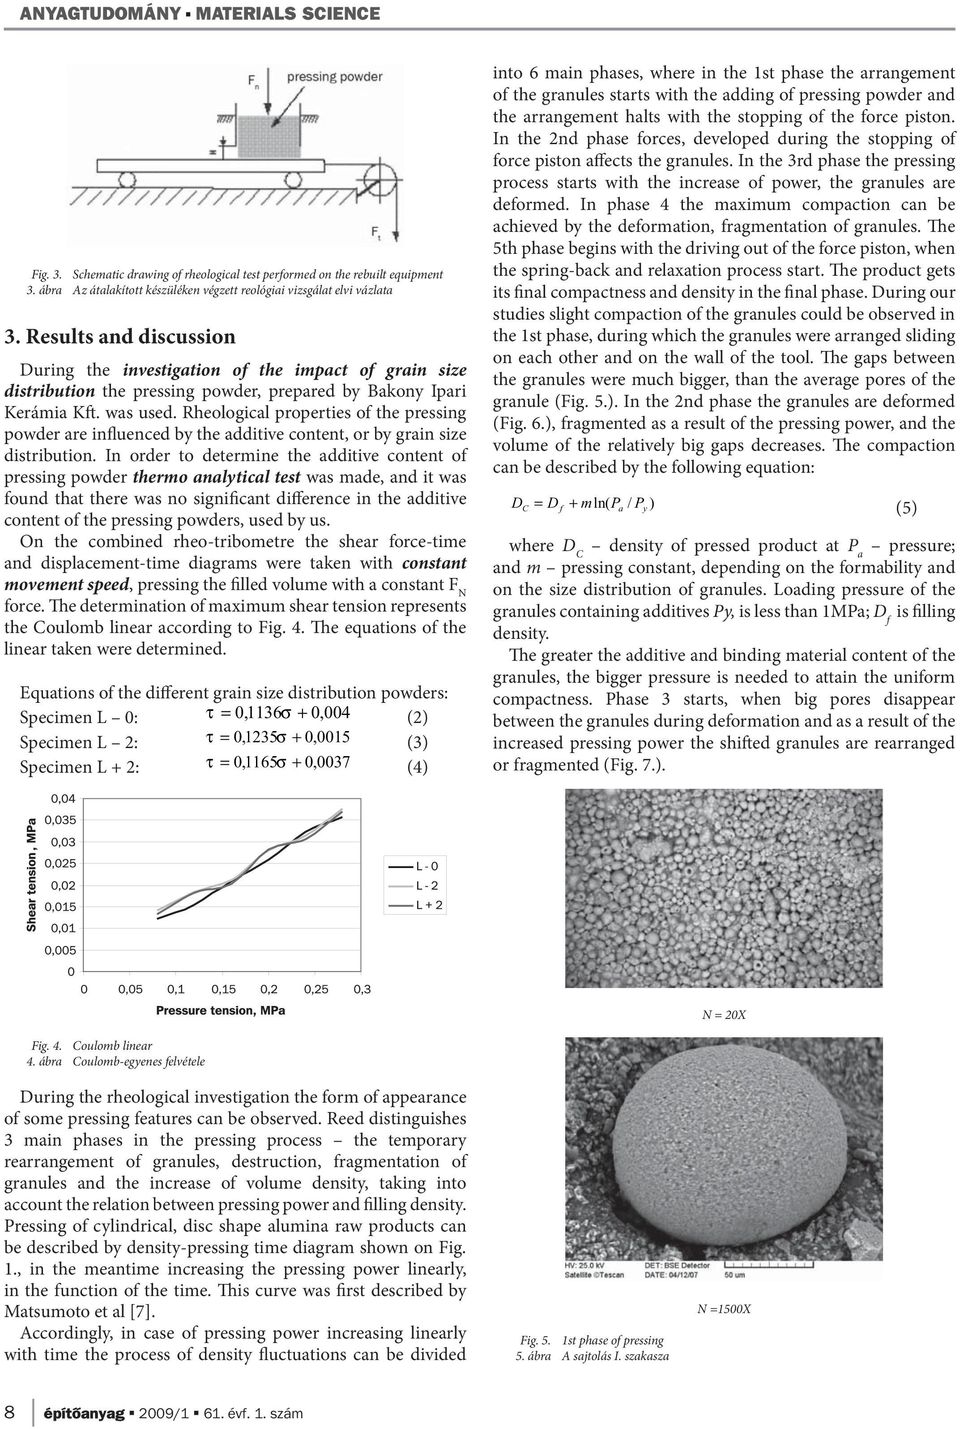 Rheological properties of the pressing powder are influenced by the additive content, or by grain size distribution.